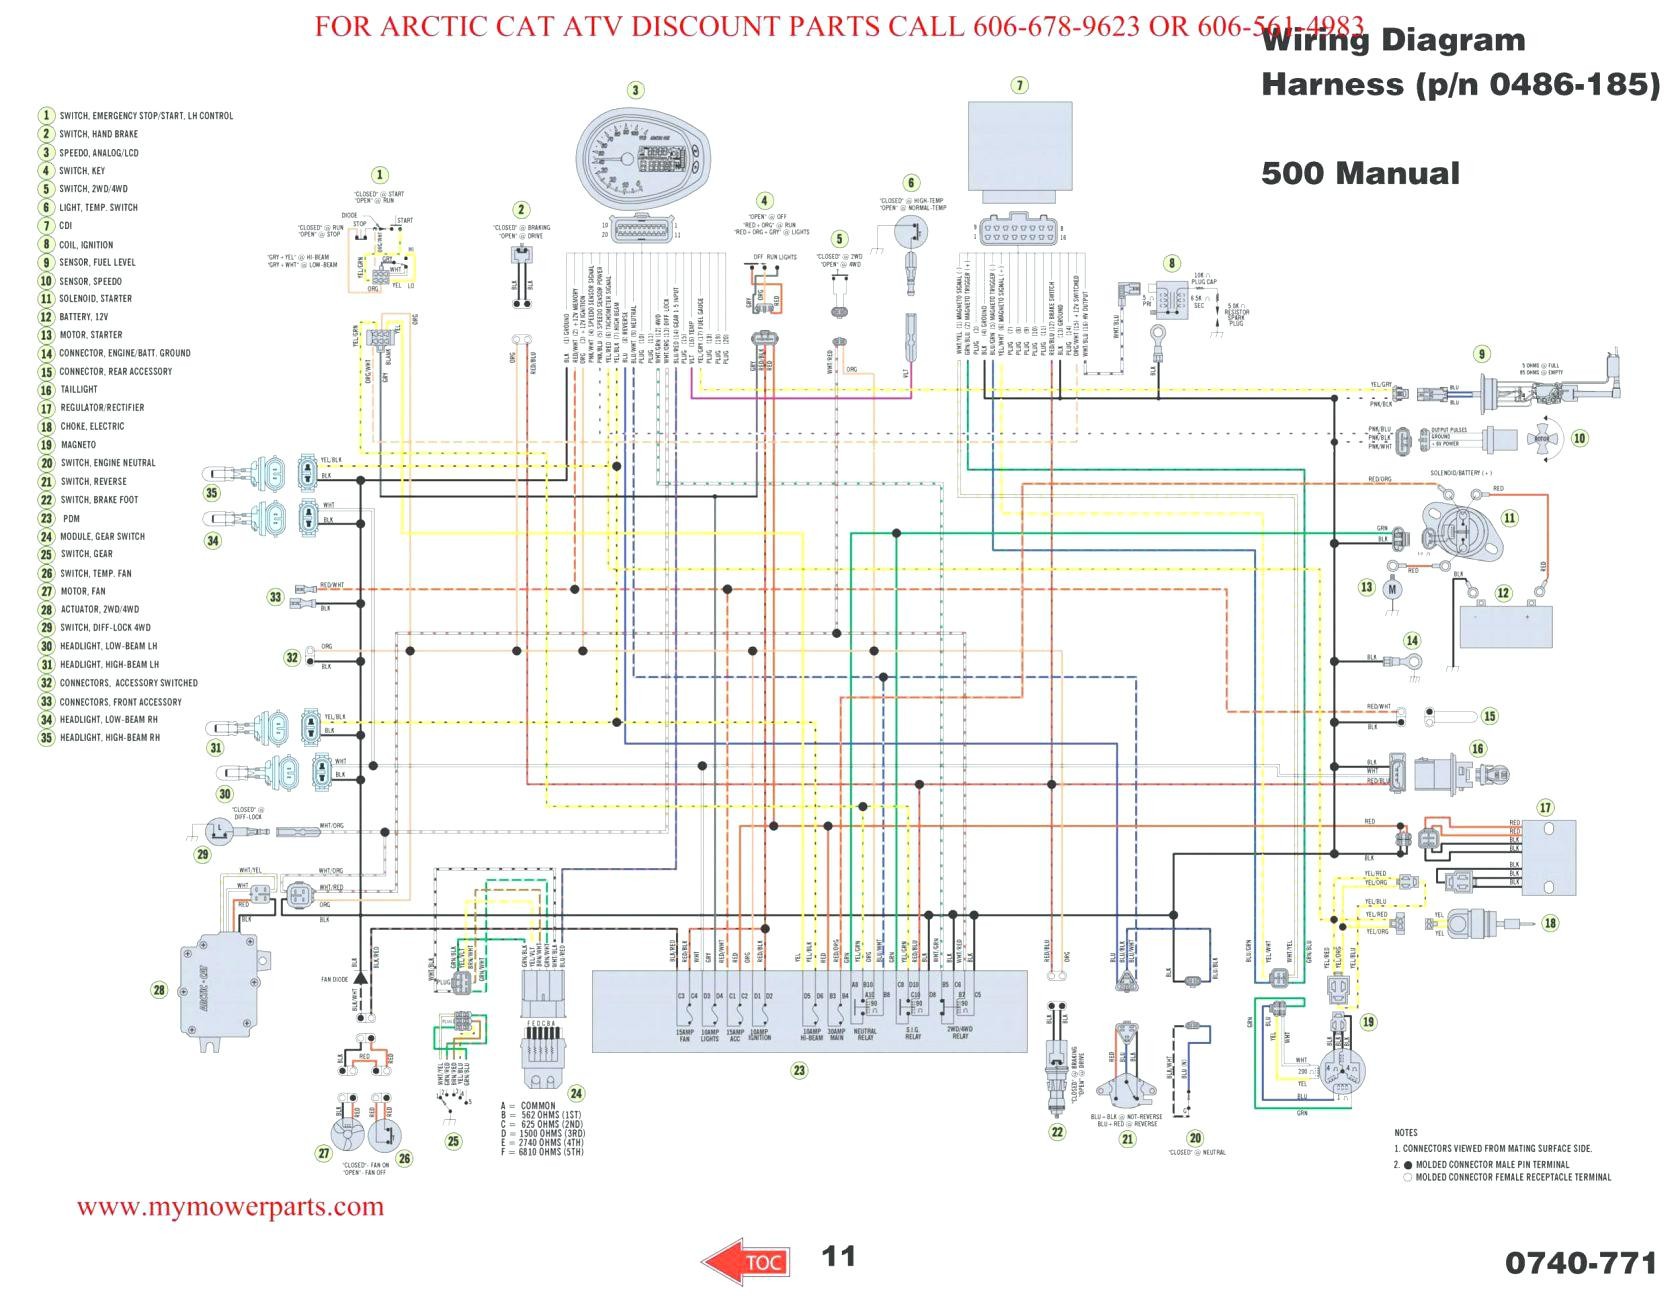 Aprilaire 700 Humidifier Wiring Diagram Model Diagrams Questions M Diagnoses Physical Connections